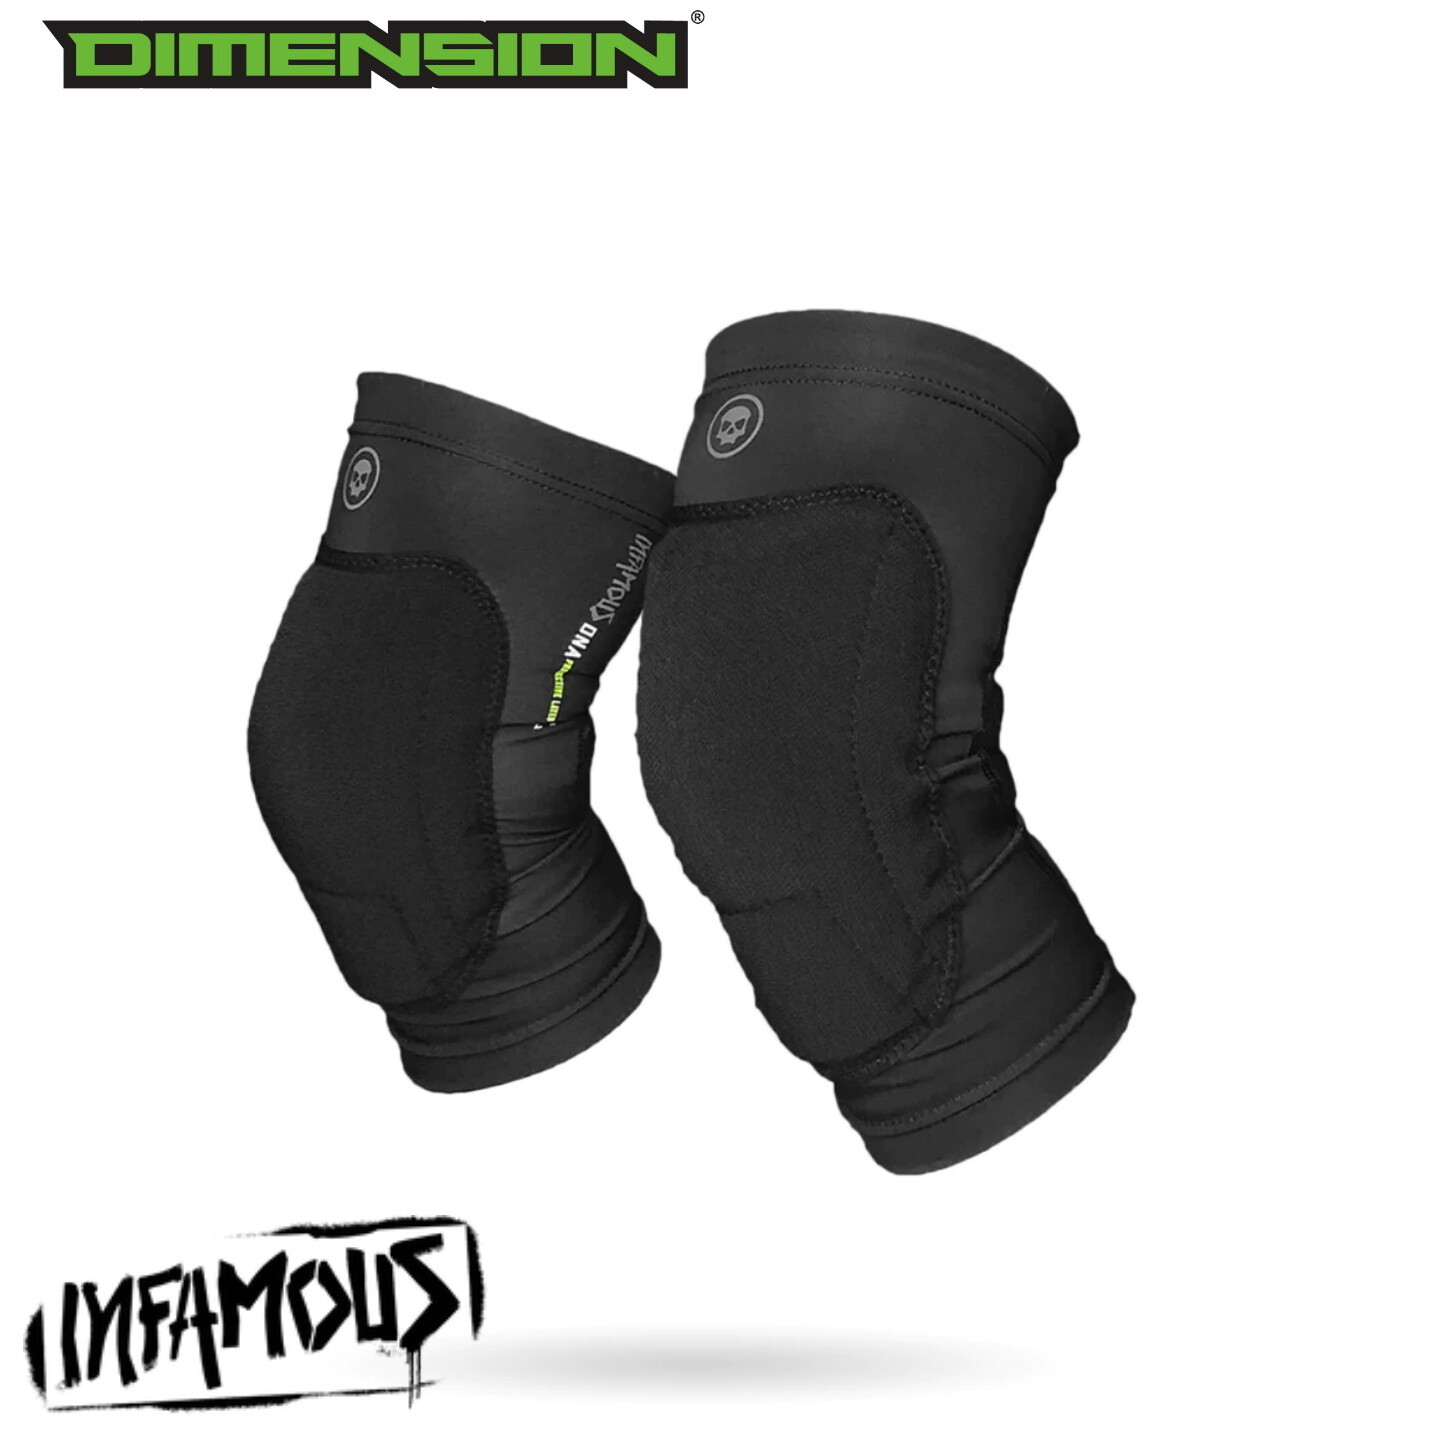 Infamous PRO DNA Knee Pads - Large